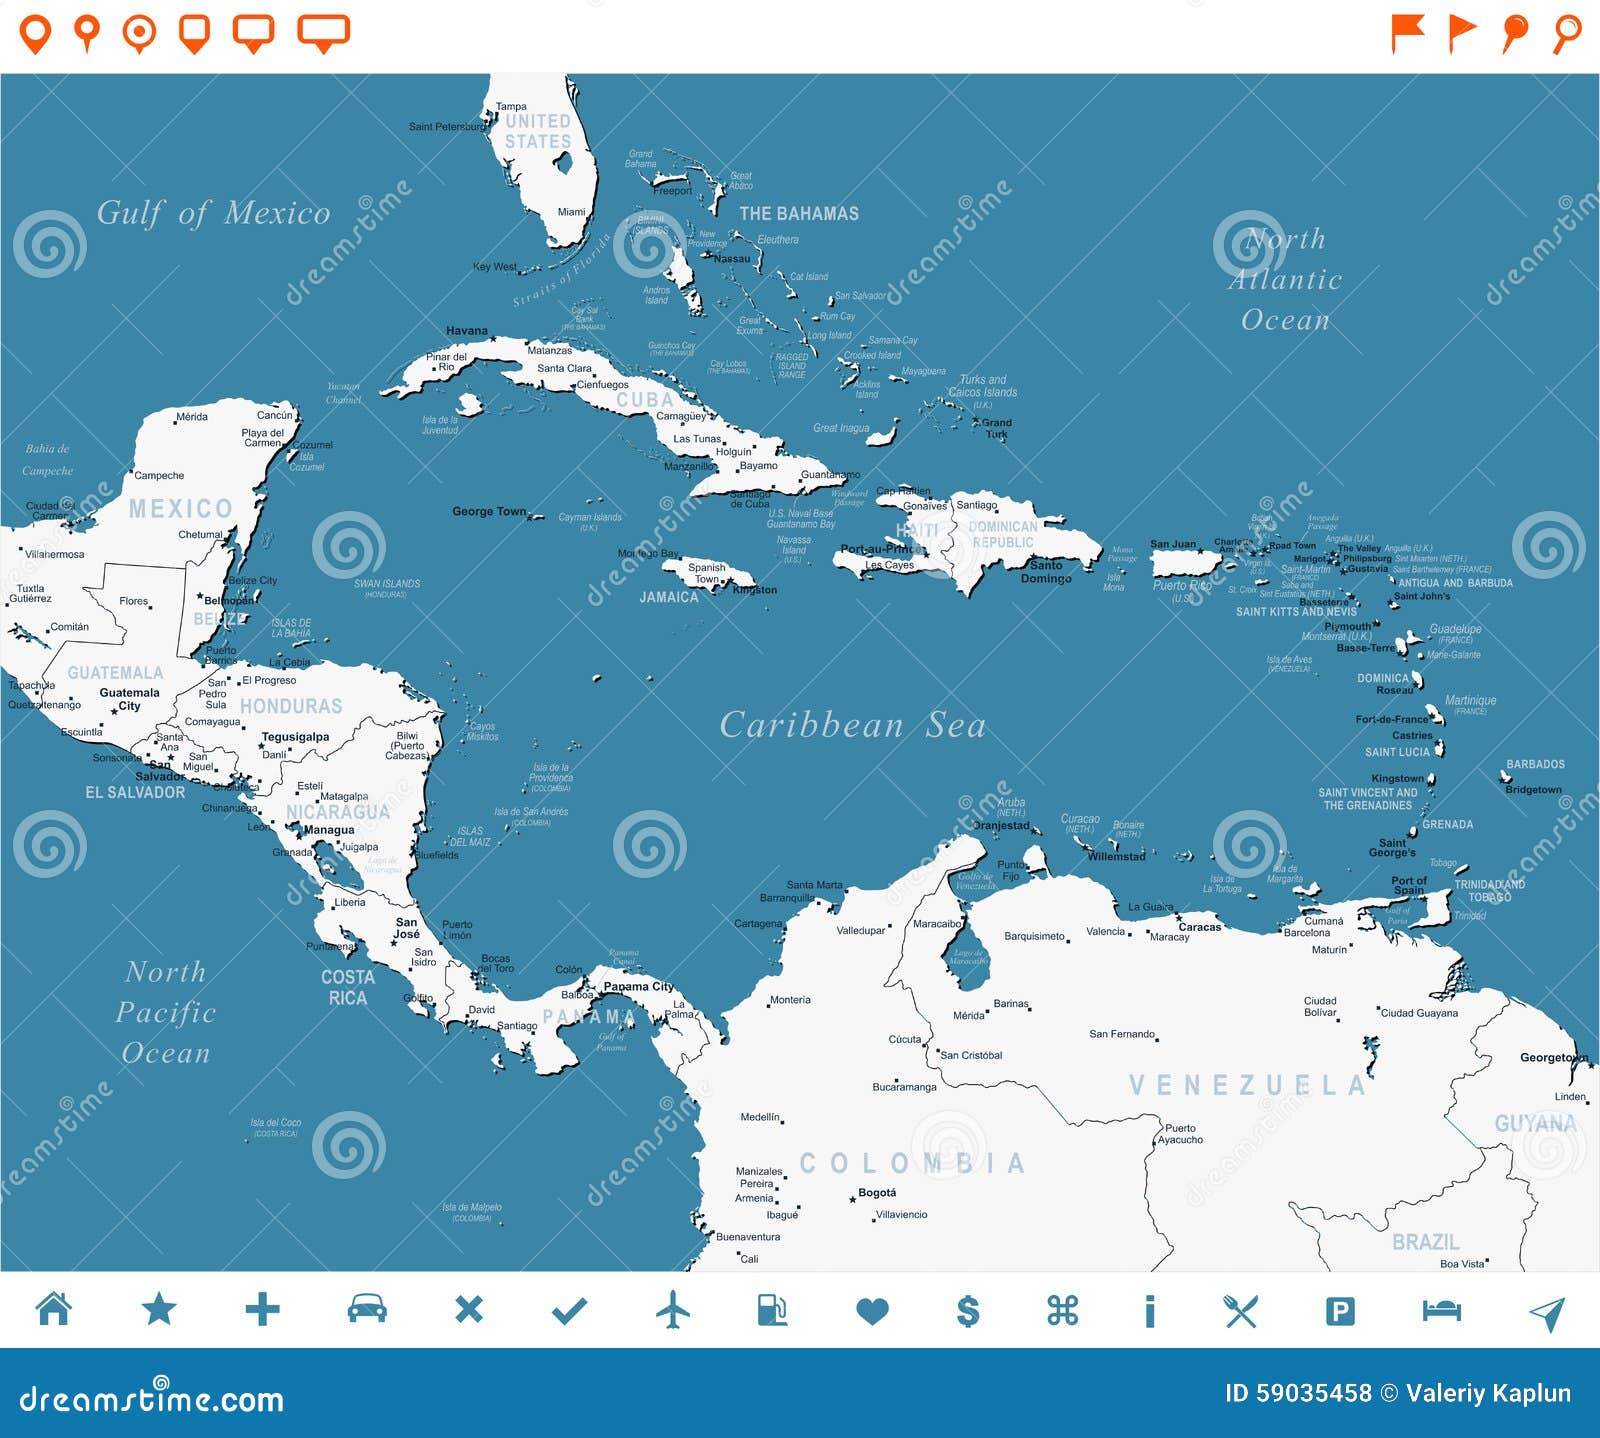 central america - map and navigation labels - .